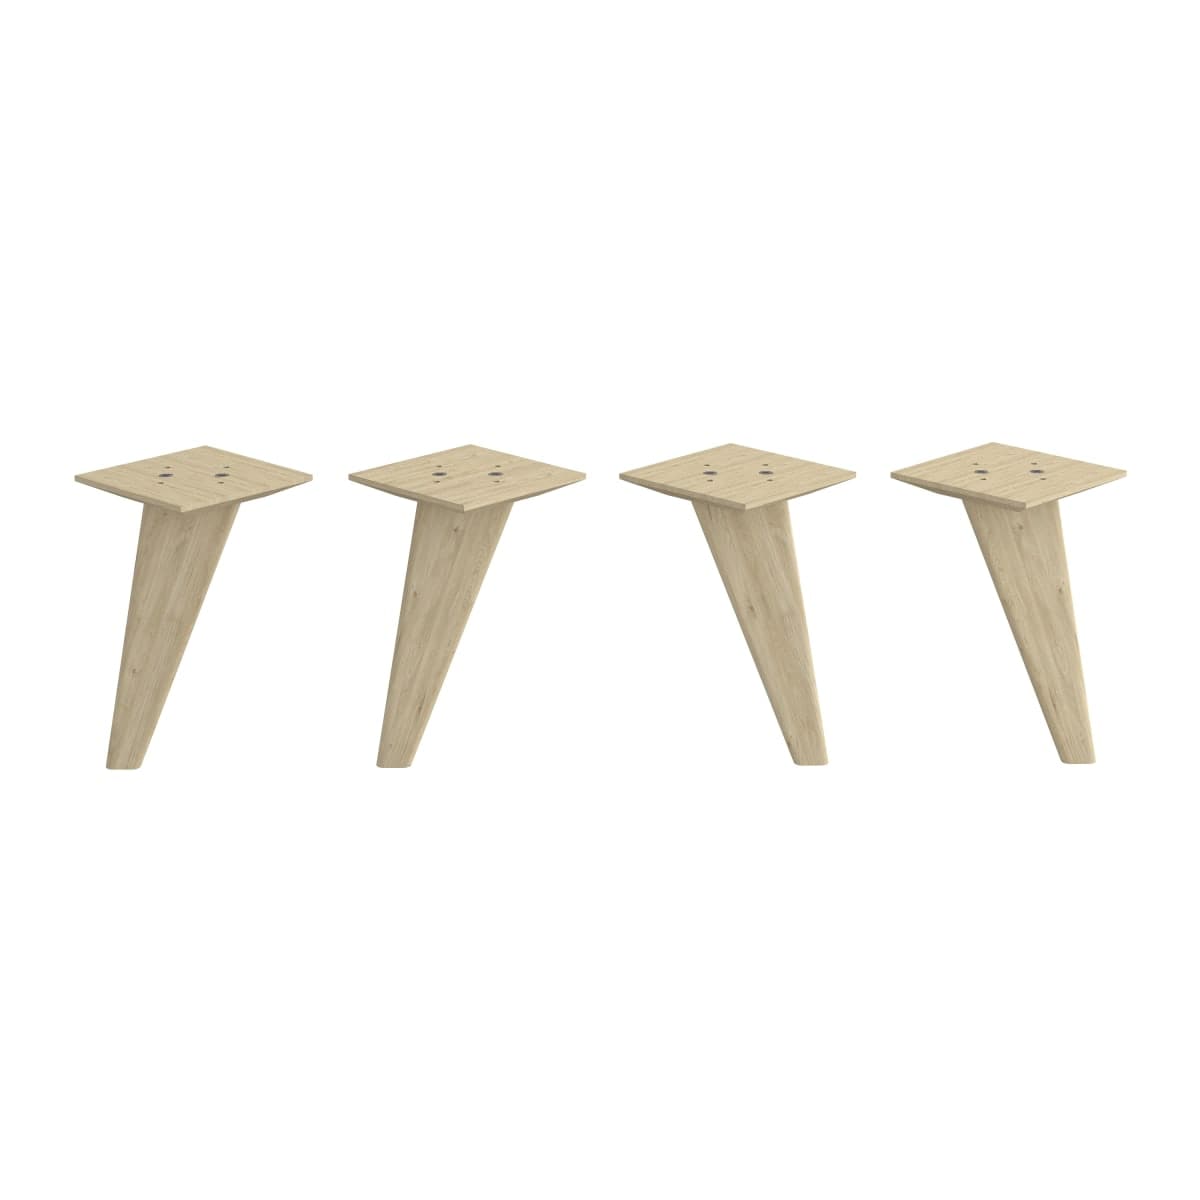 SET OF 4 SPACEO KUB SIDE FEET H21.6CM IN ROUGH PINE